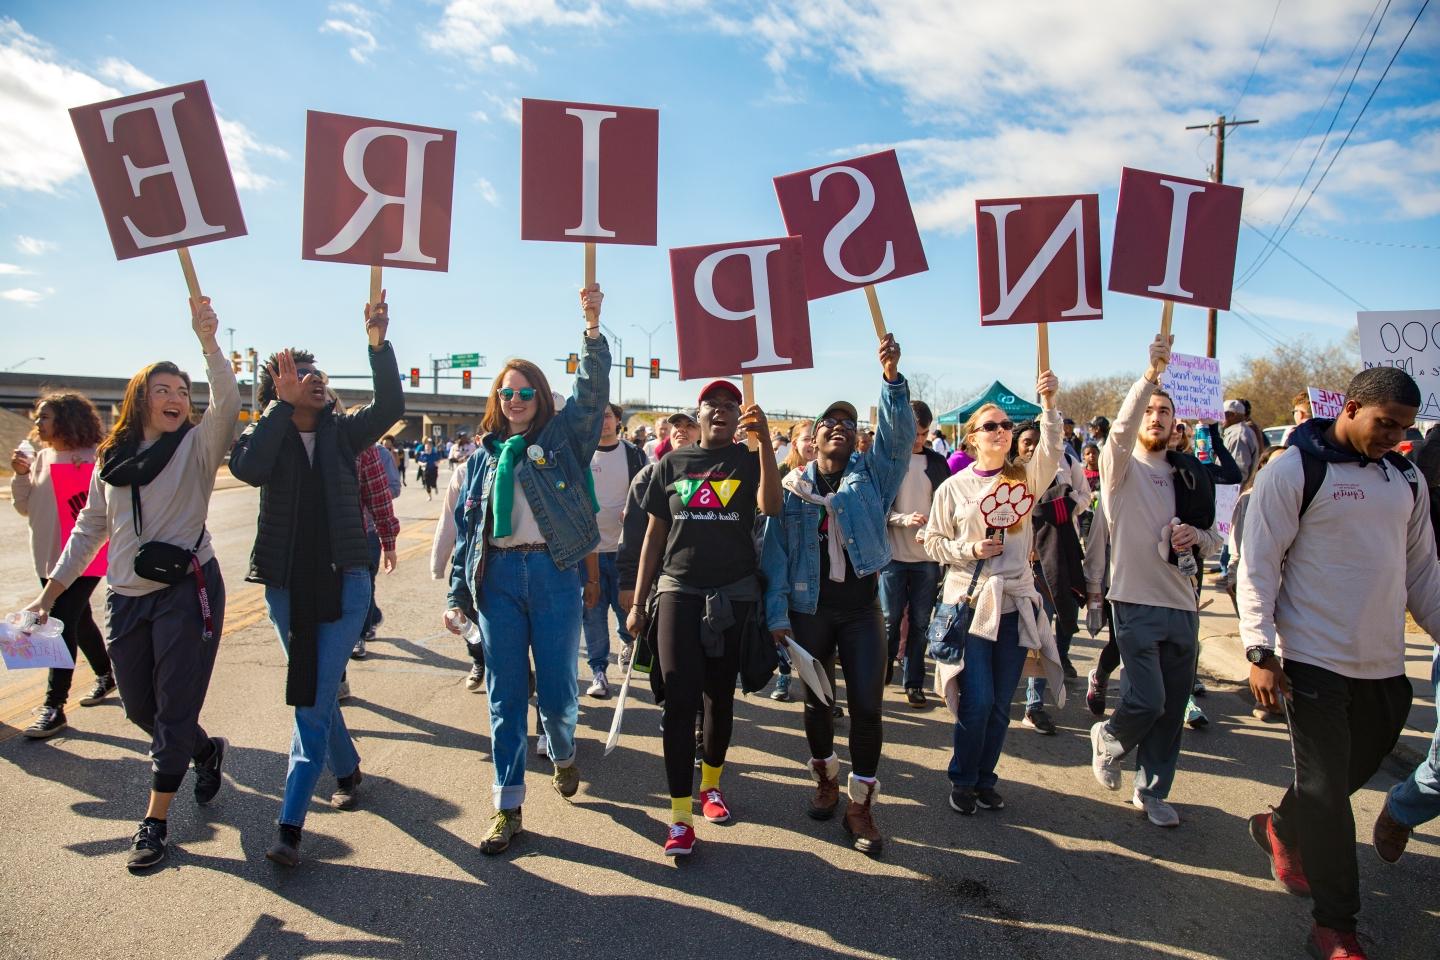 marchers hold up signs that read "INSPIRE" during the MLK March